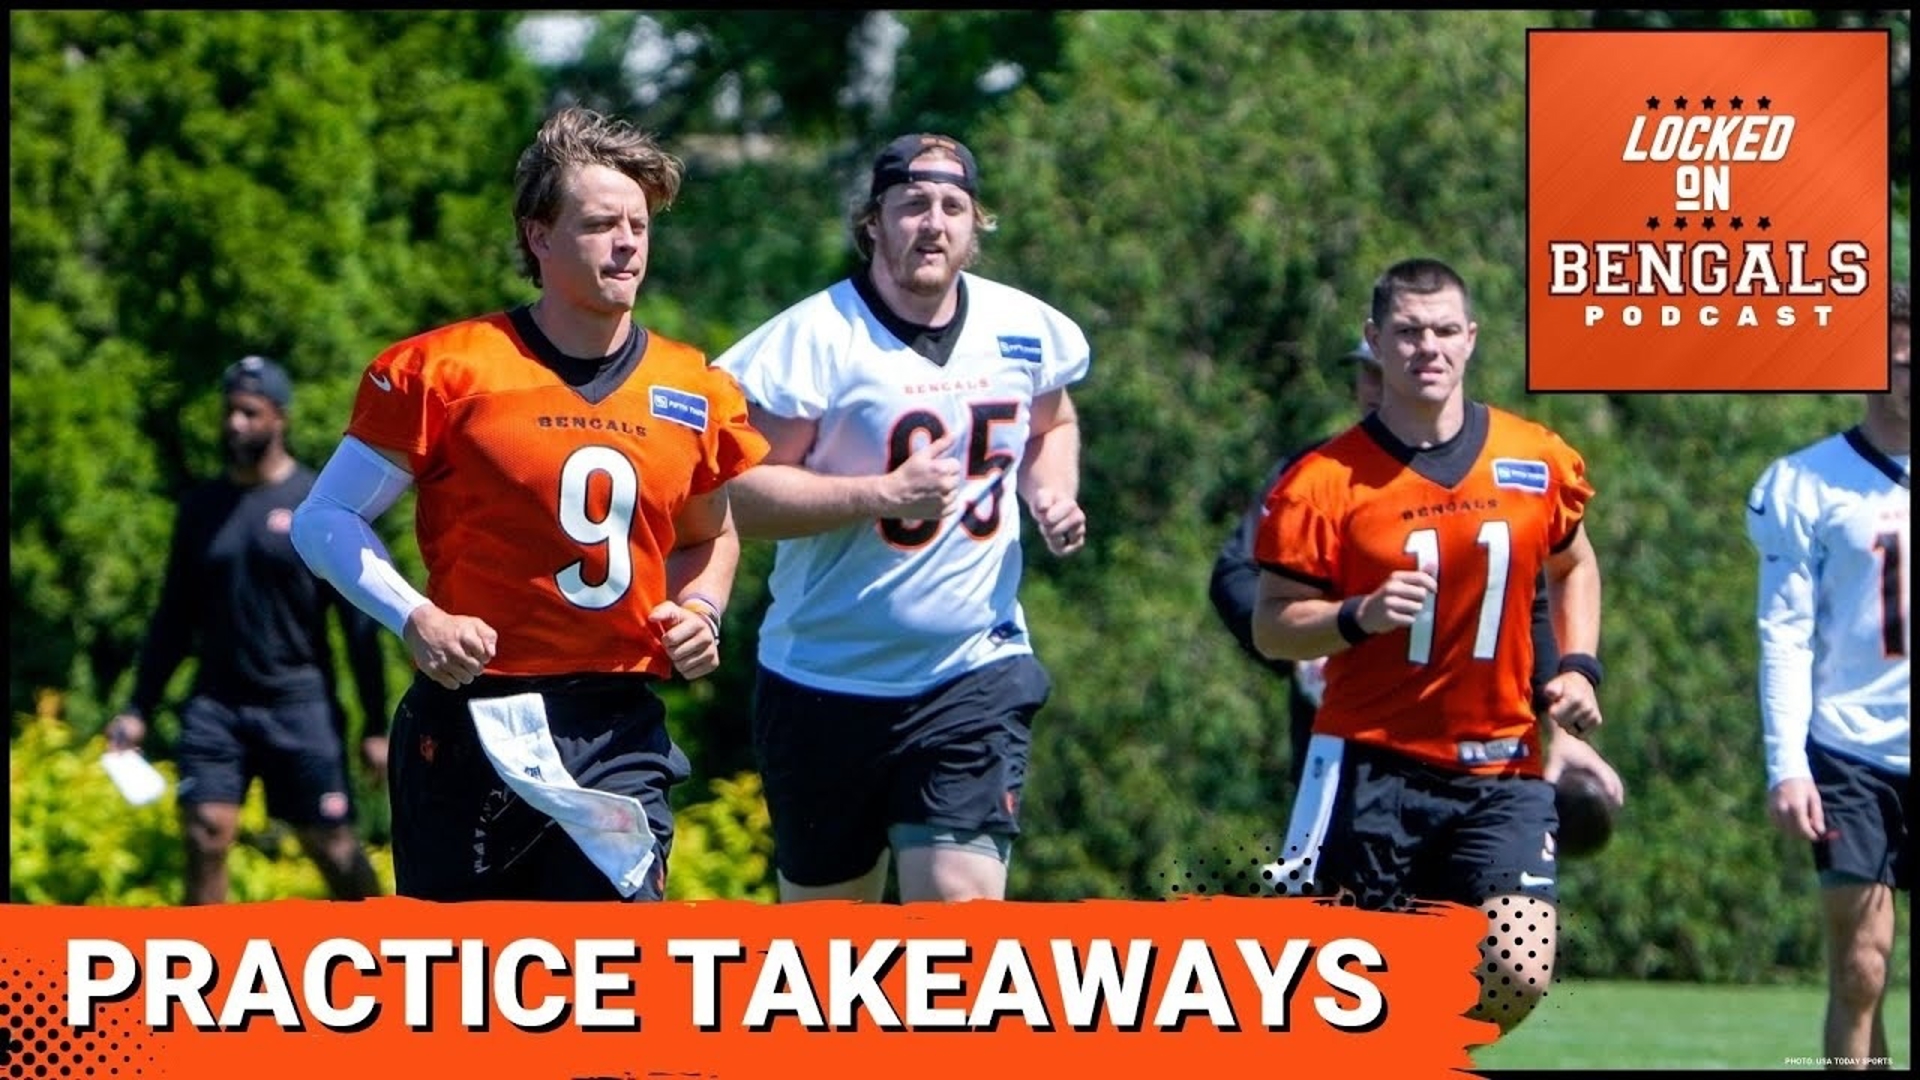 The Cincinnati Bengals had their first OTA practice on Tuesday. The guys share their observations from the session.